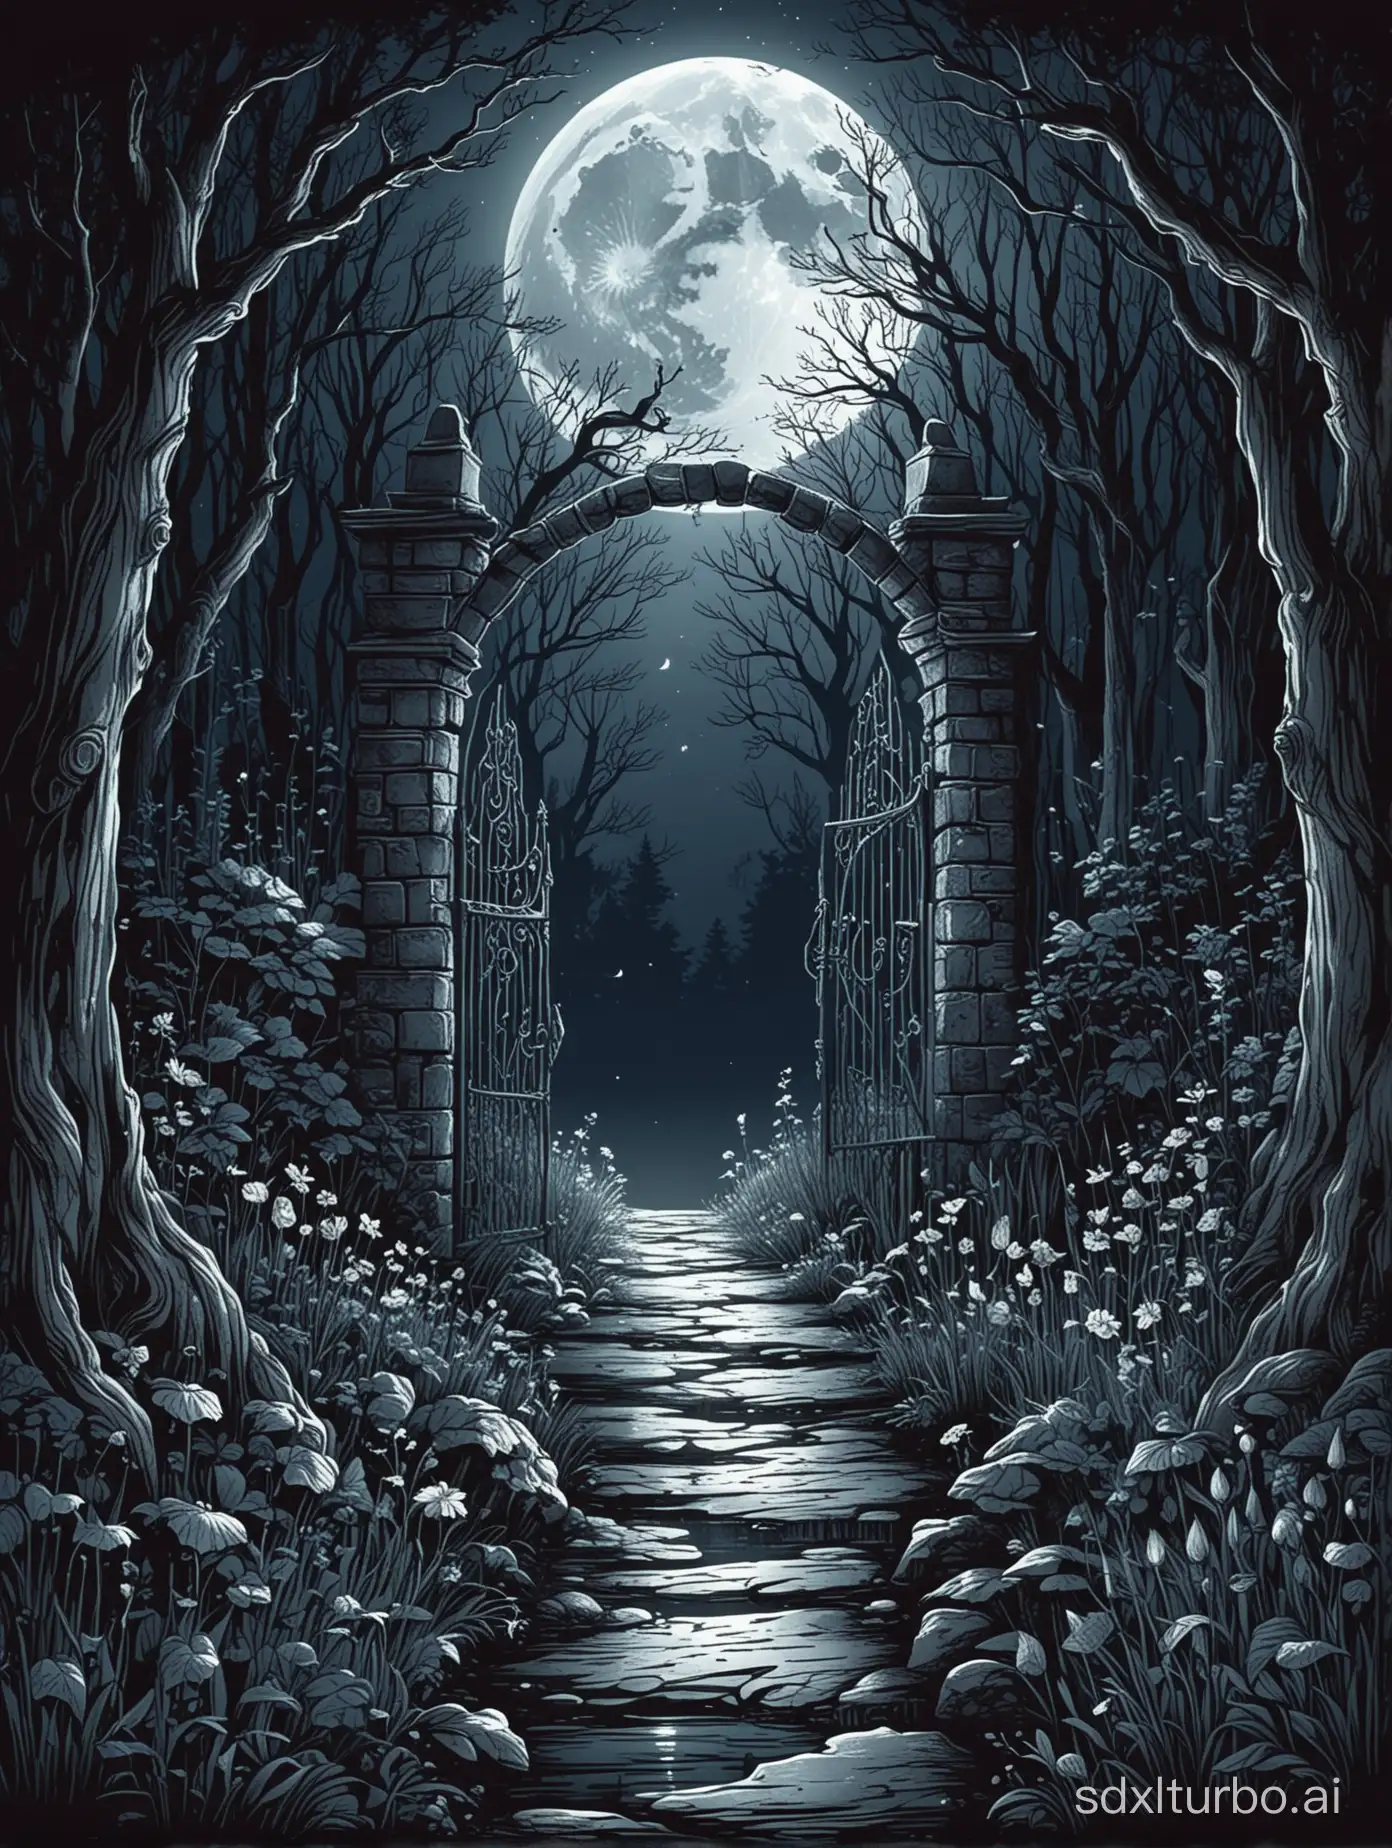 Mysterious-Garden-Entrance-with-Moonlight-and-Mythical-Creatures